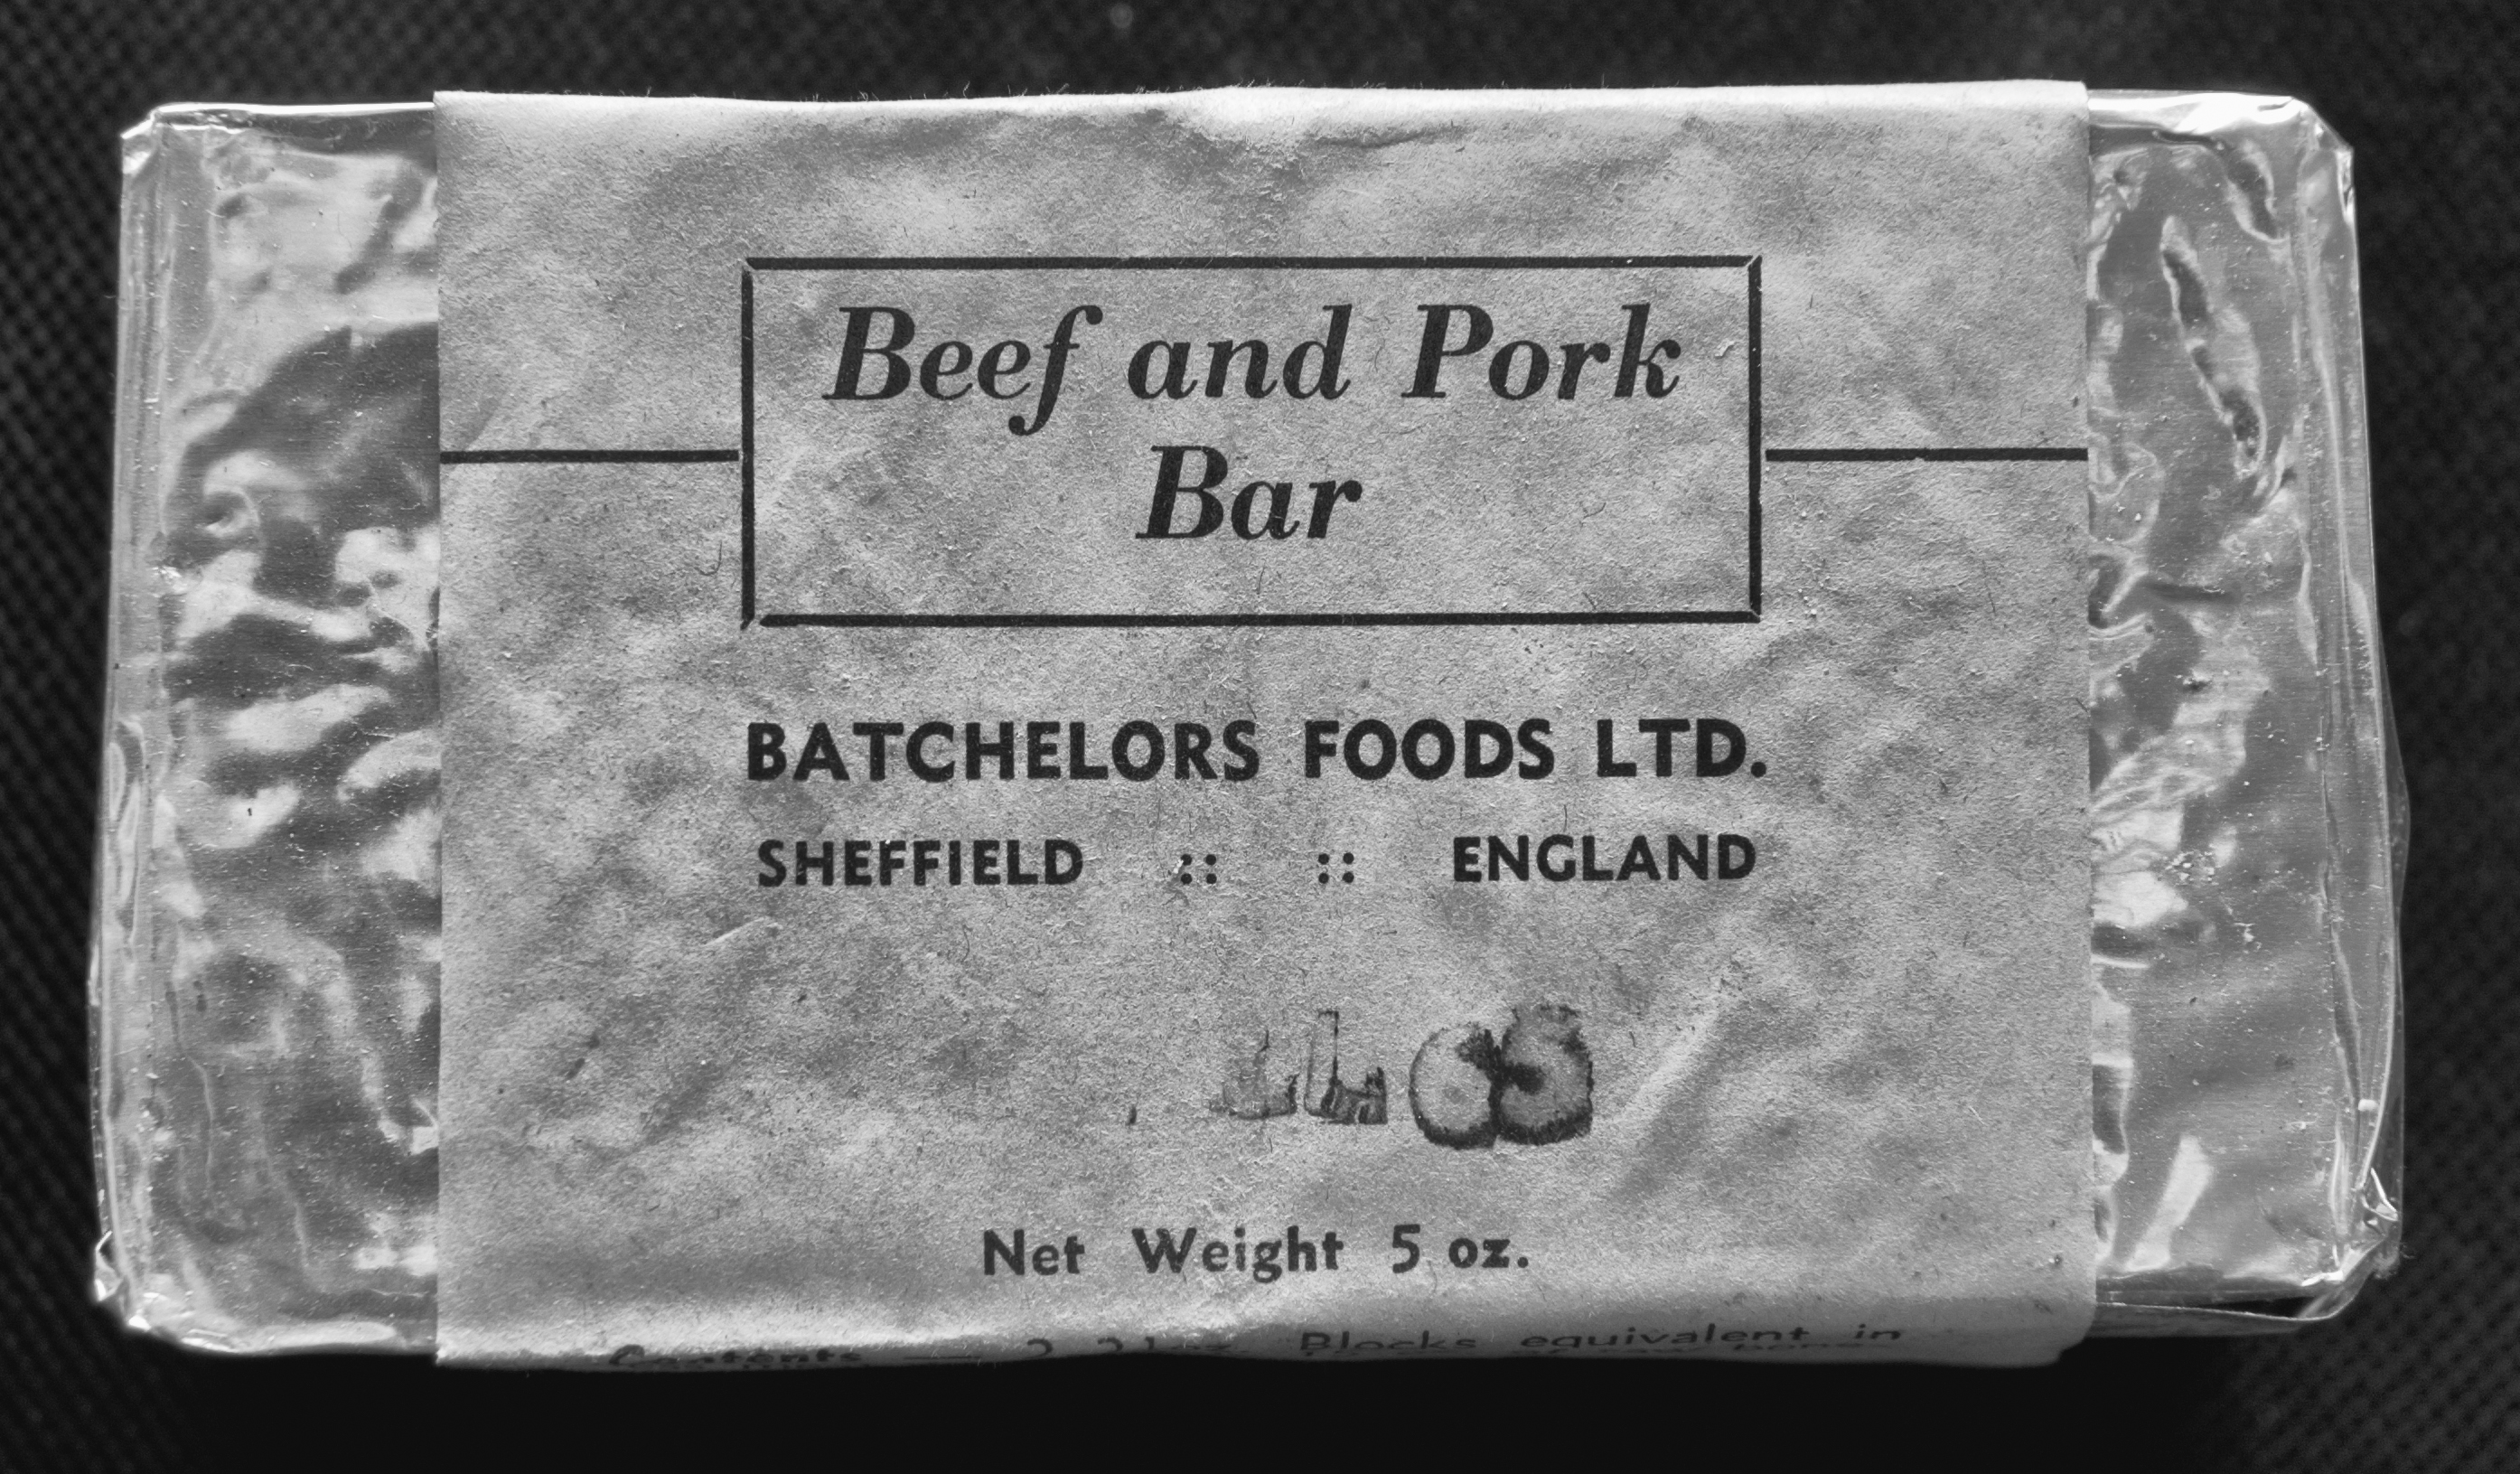 Beef and pork bar - early expedition food. Image: Supplied